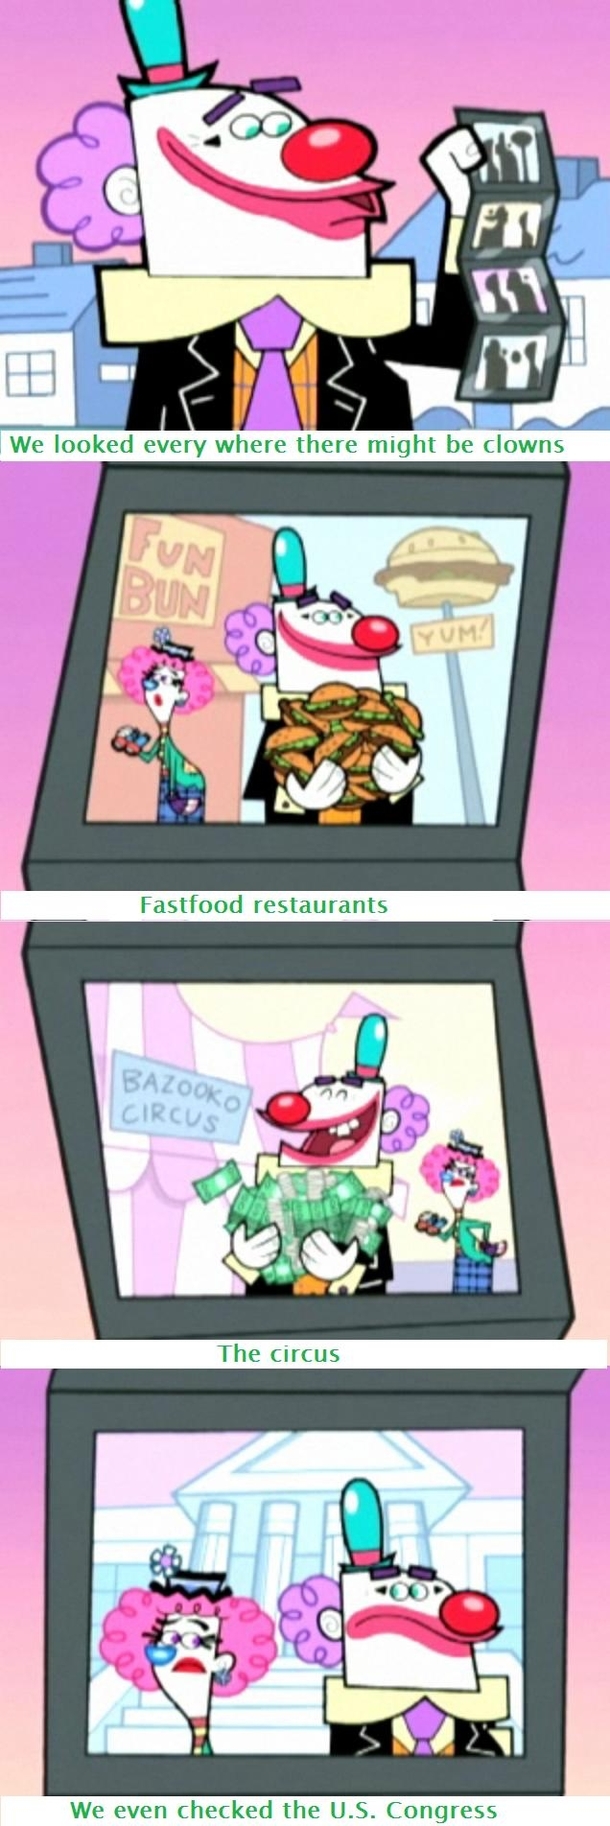 Great line from The Fairly Odd Parents